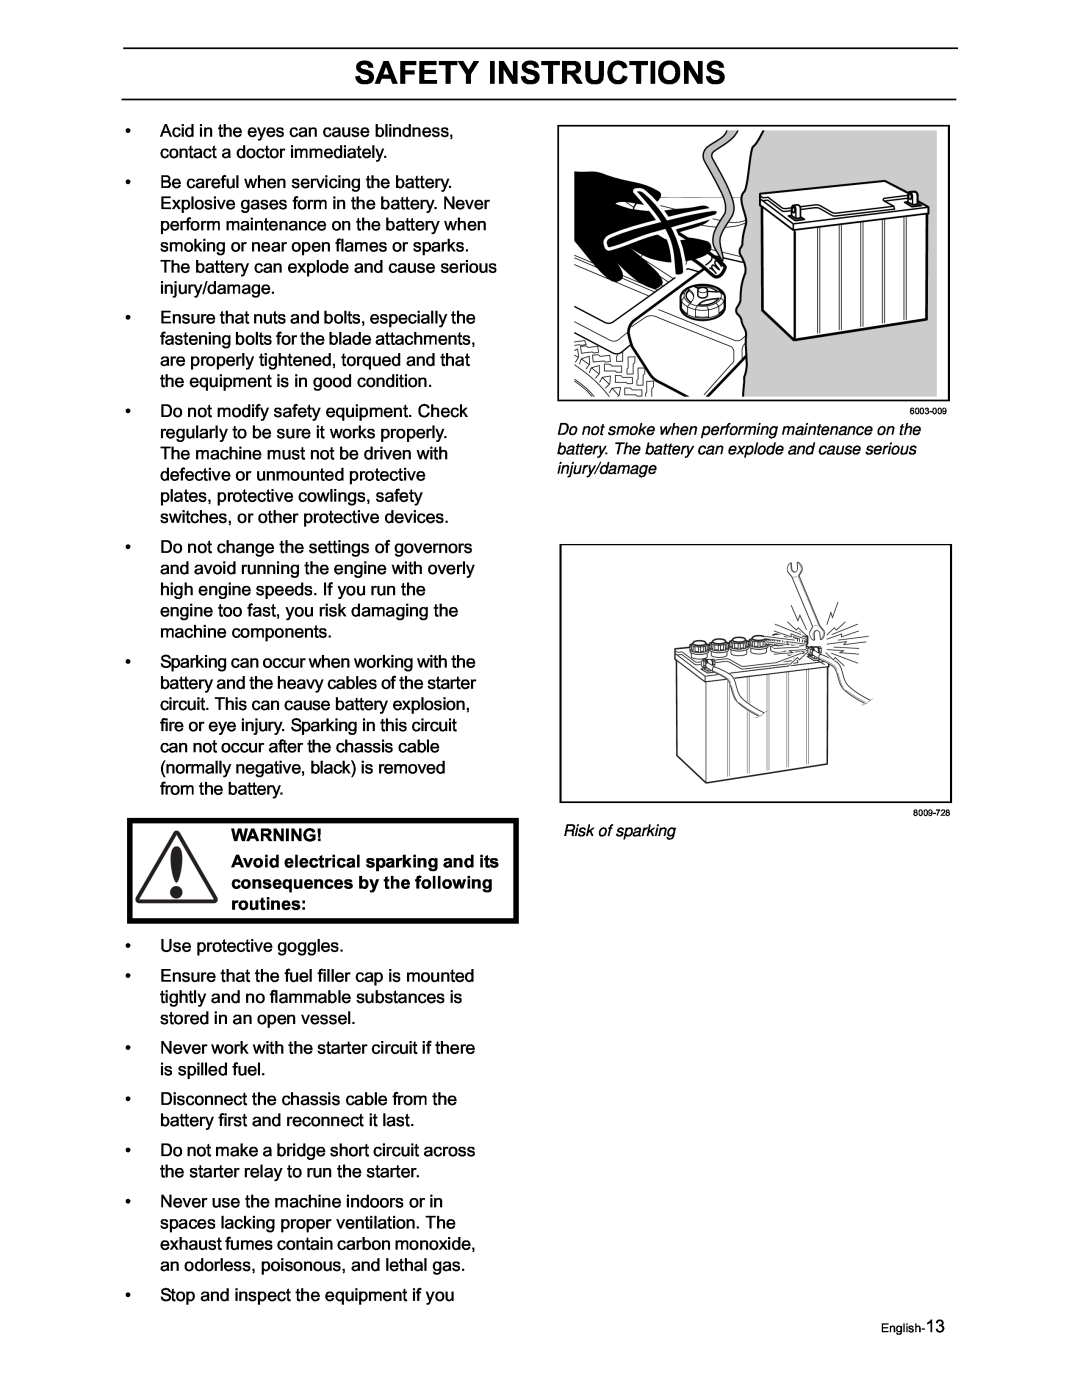 Yazoo/Kees ZVKH61273, ZVKW52253 manual Safety Instructions, Use protective goggles 